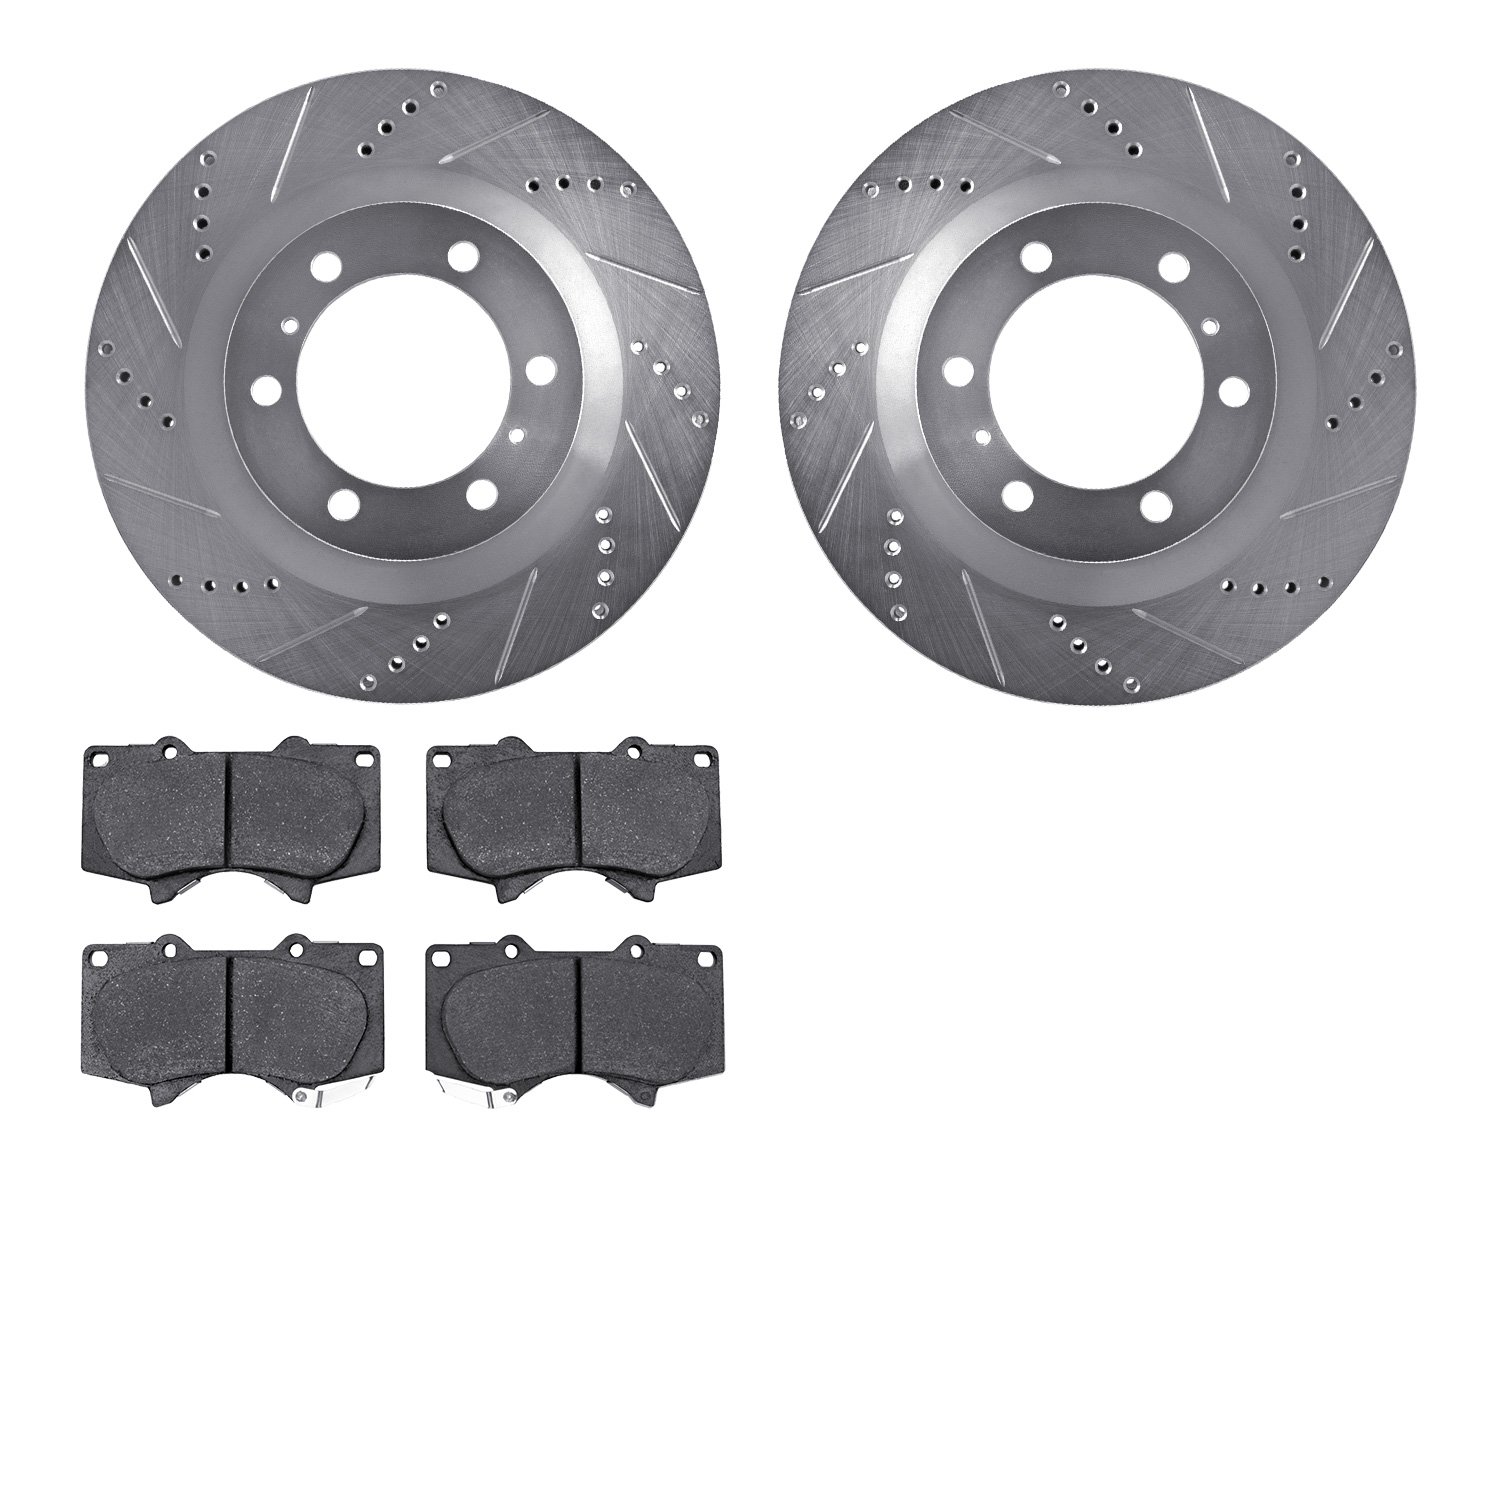 7402-76023 Drilled/Slotted Brake Rotors with Ultimate-Duty Brake Pads Kit [Silver], Fits Select Lexus/Toyota/Scion, Position: Fr